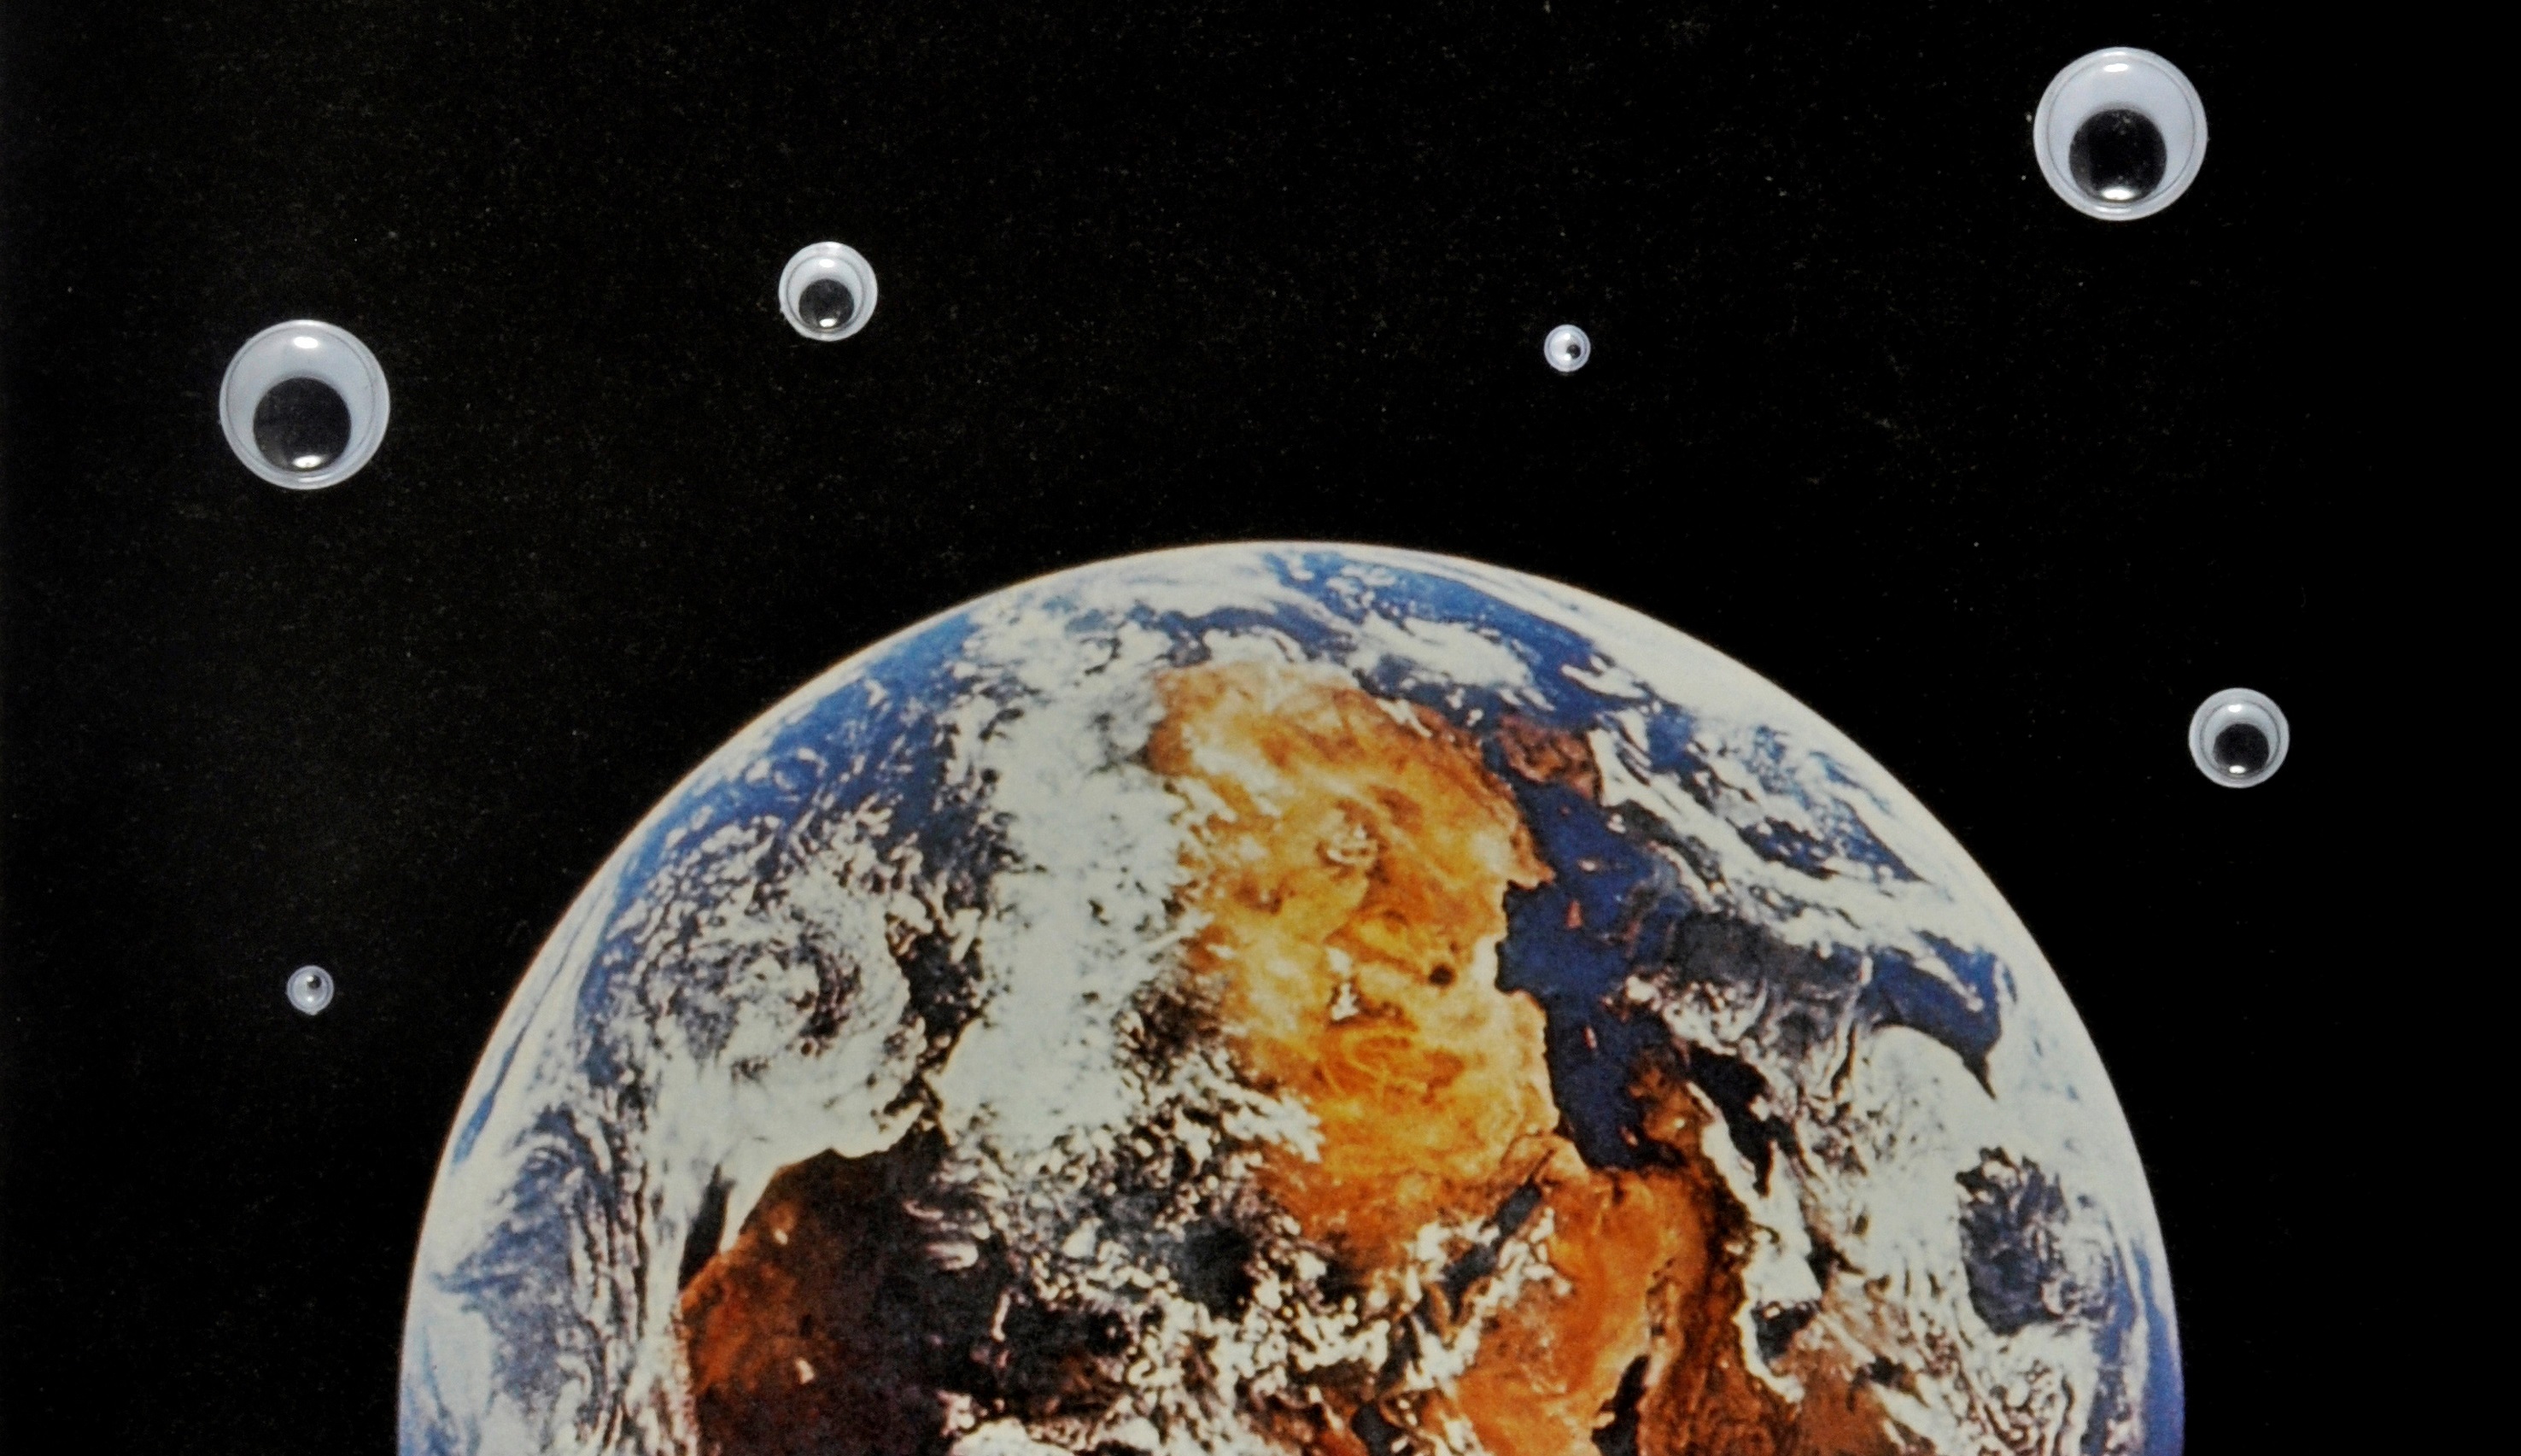 Andy Holden's ‘Eyes in Space’ (cropped)